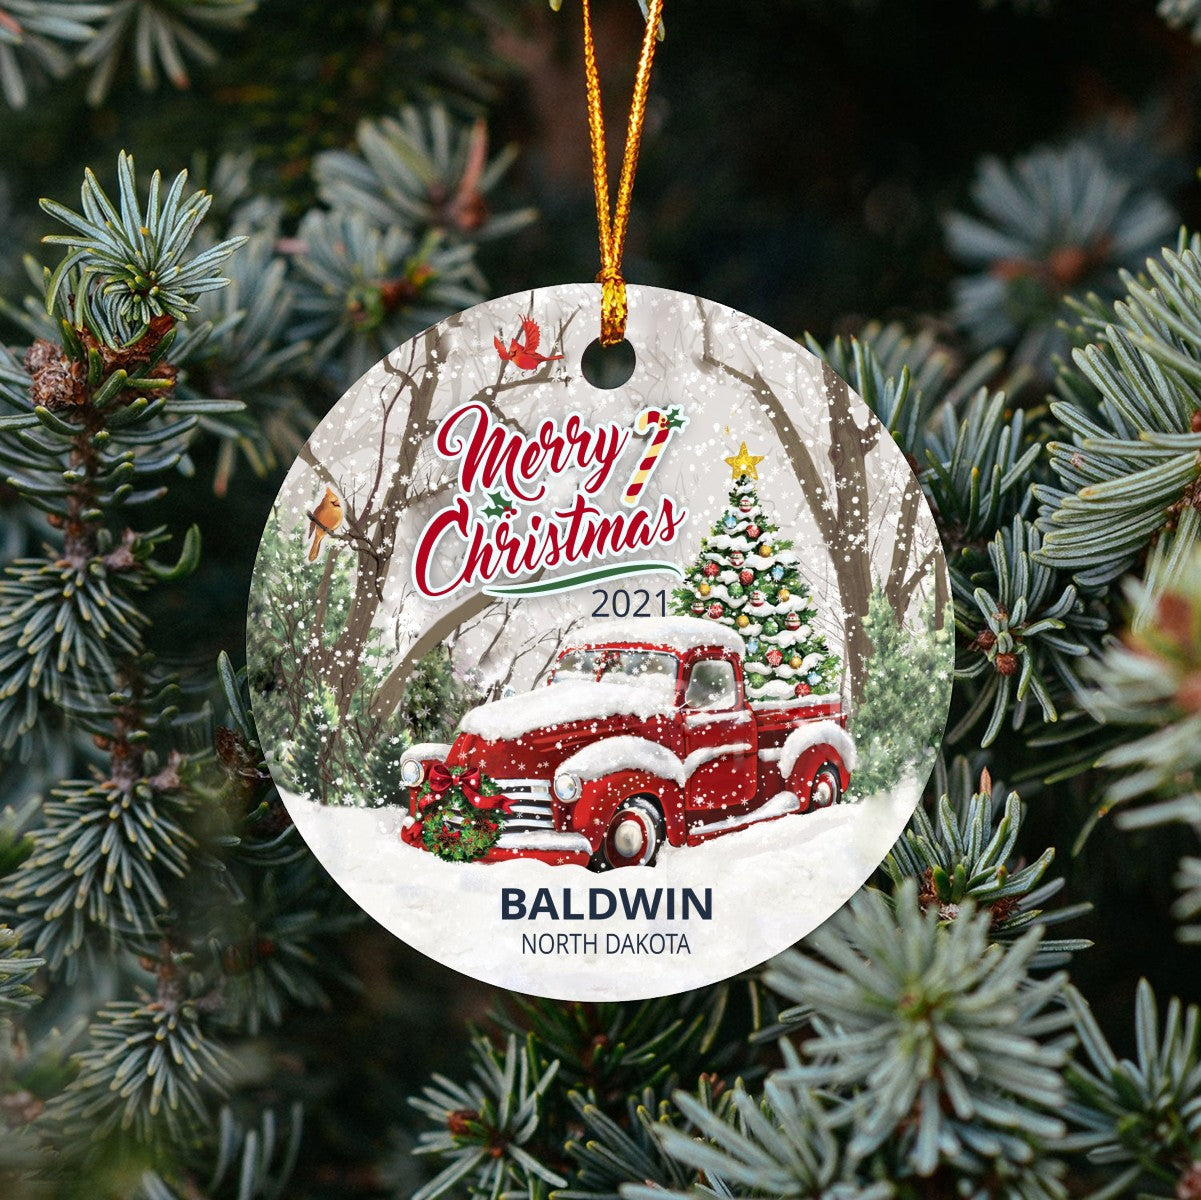 Christmas Tree Ornaments Baldwin - Ornament With Name City, State Baldwin North Dakota ND Ornament - Red Truck Xmas Ornaments 3'' Plastic Gift For Family, Friend And Housewarming